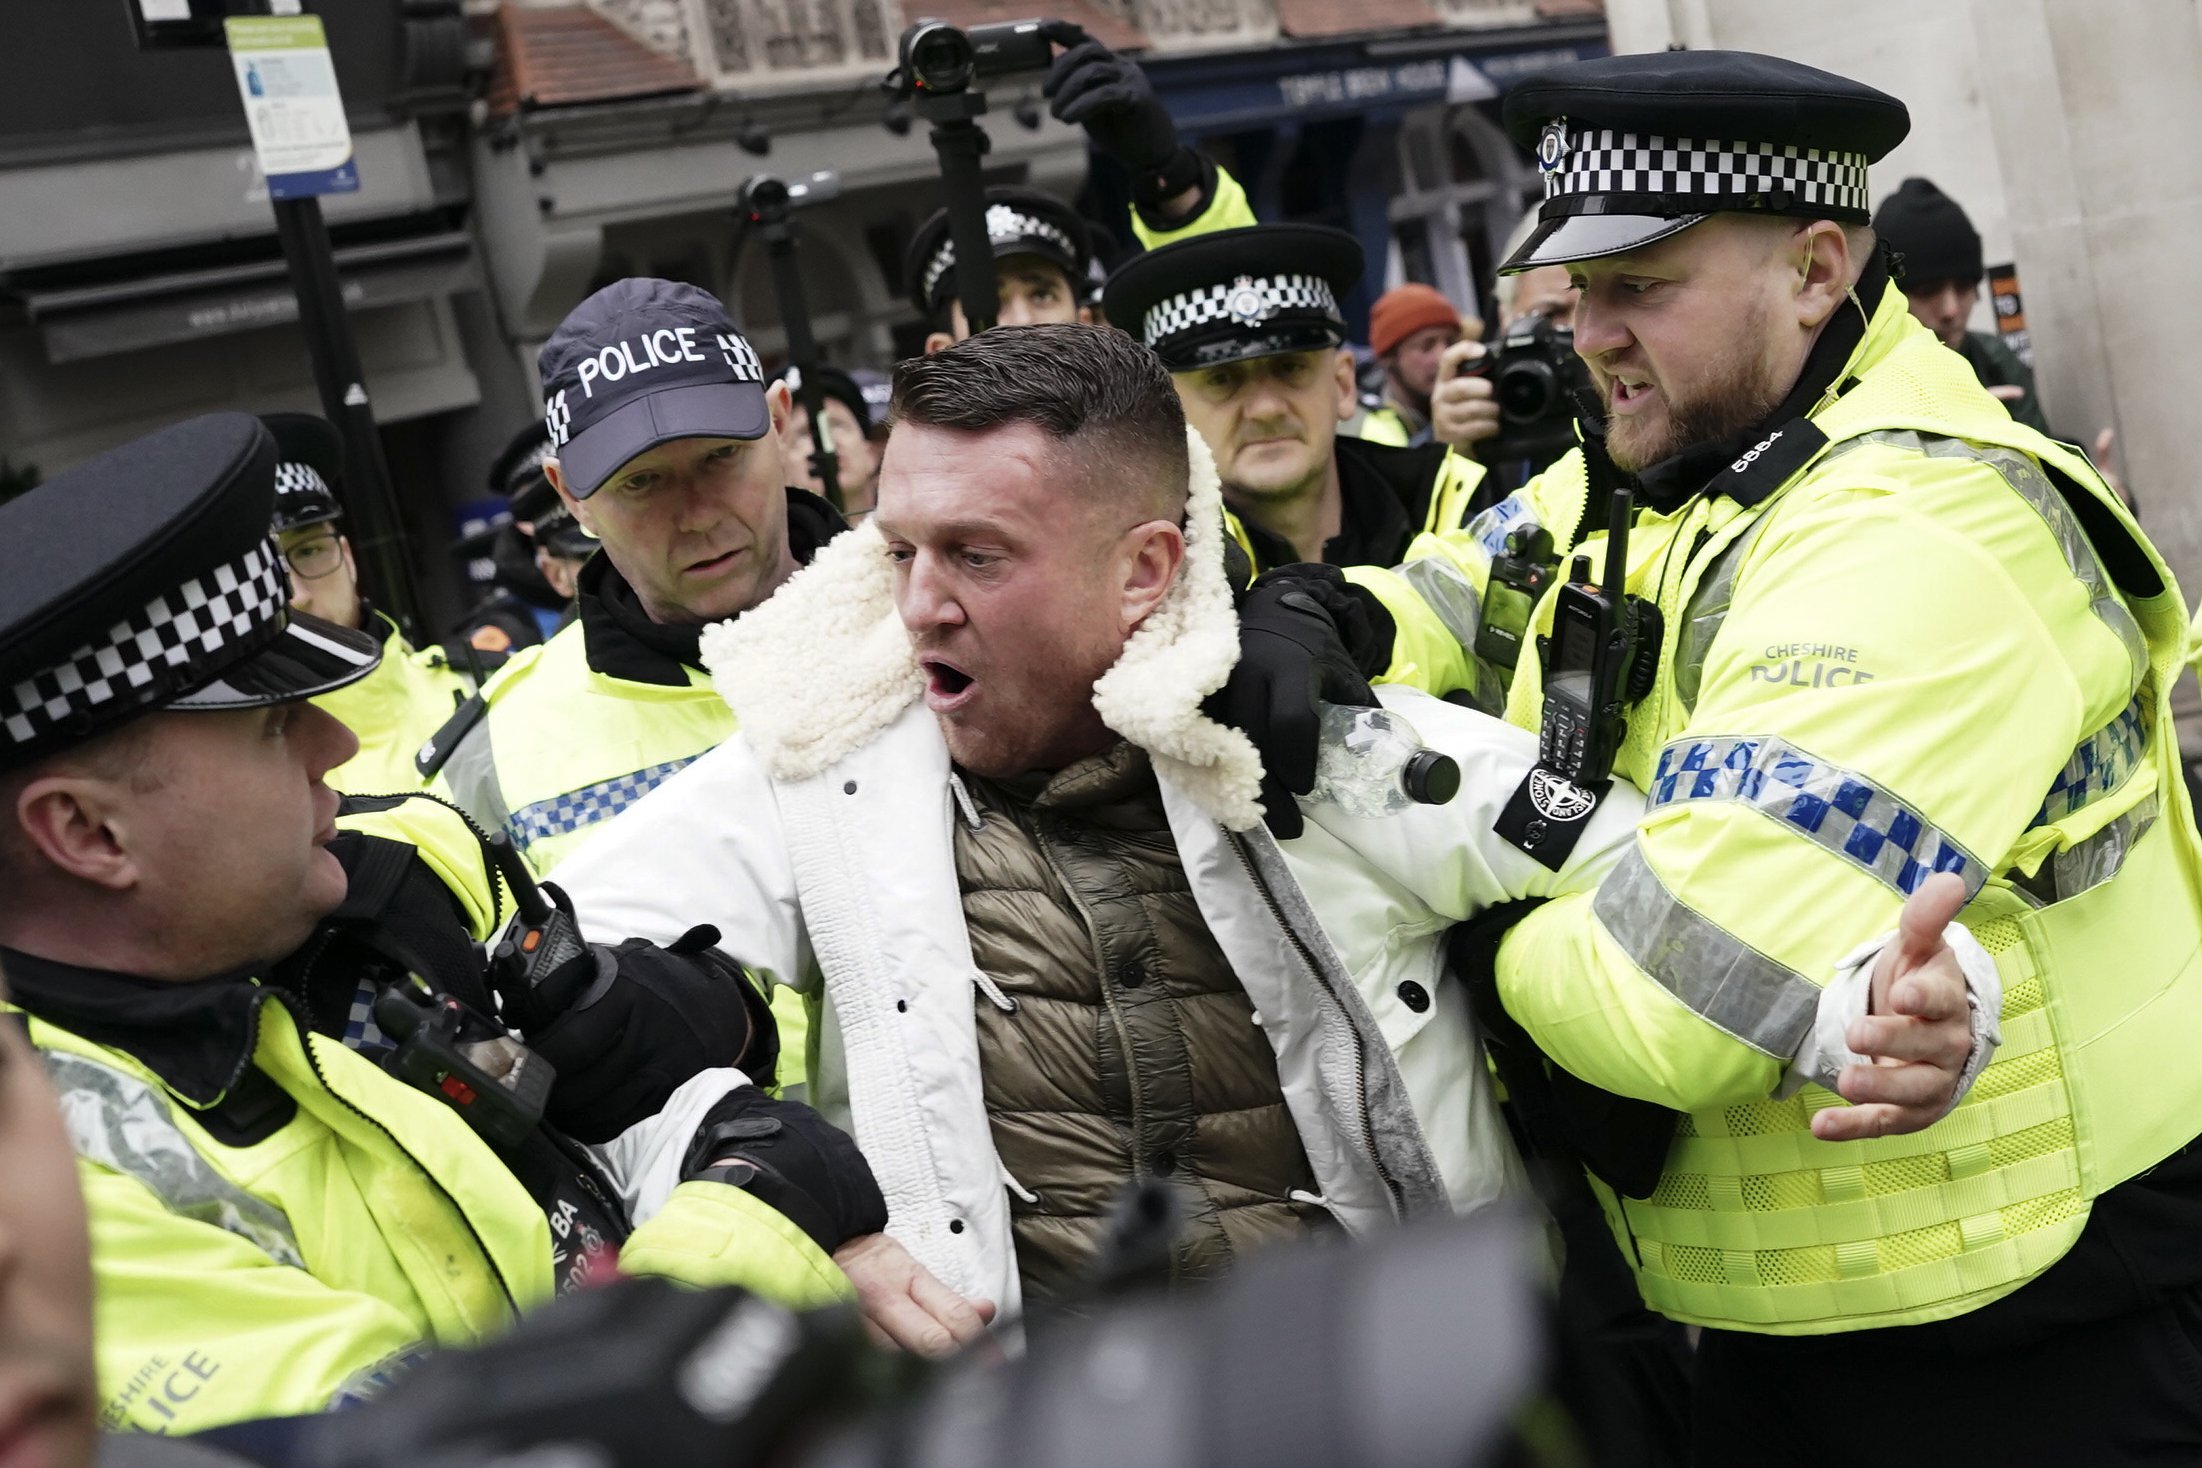 tommy robinson pepper sprayed by police and arrested at antisemitism march